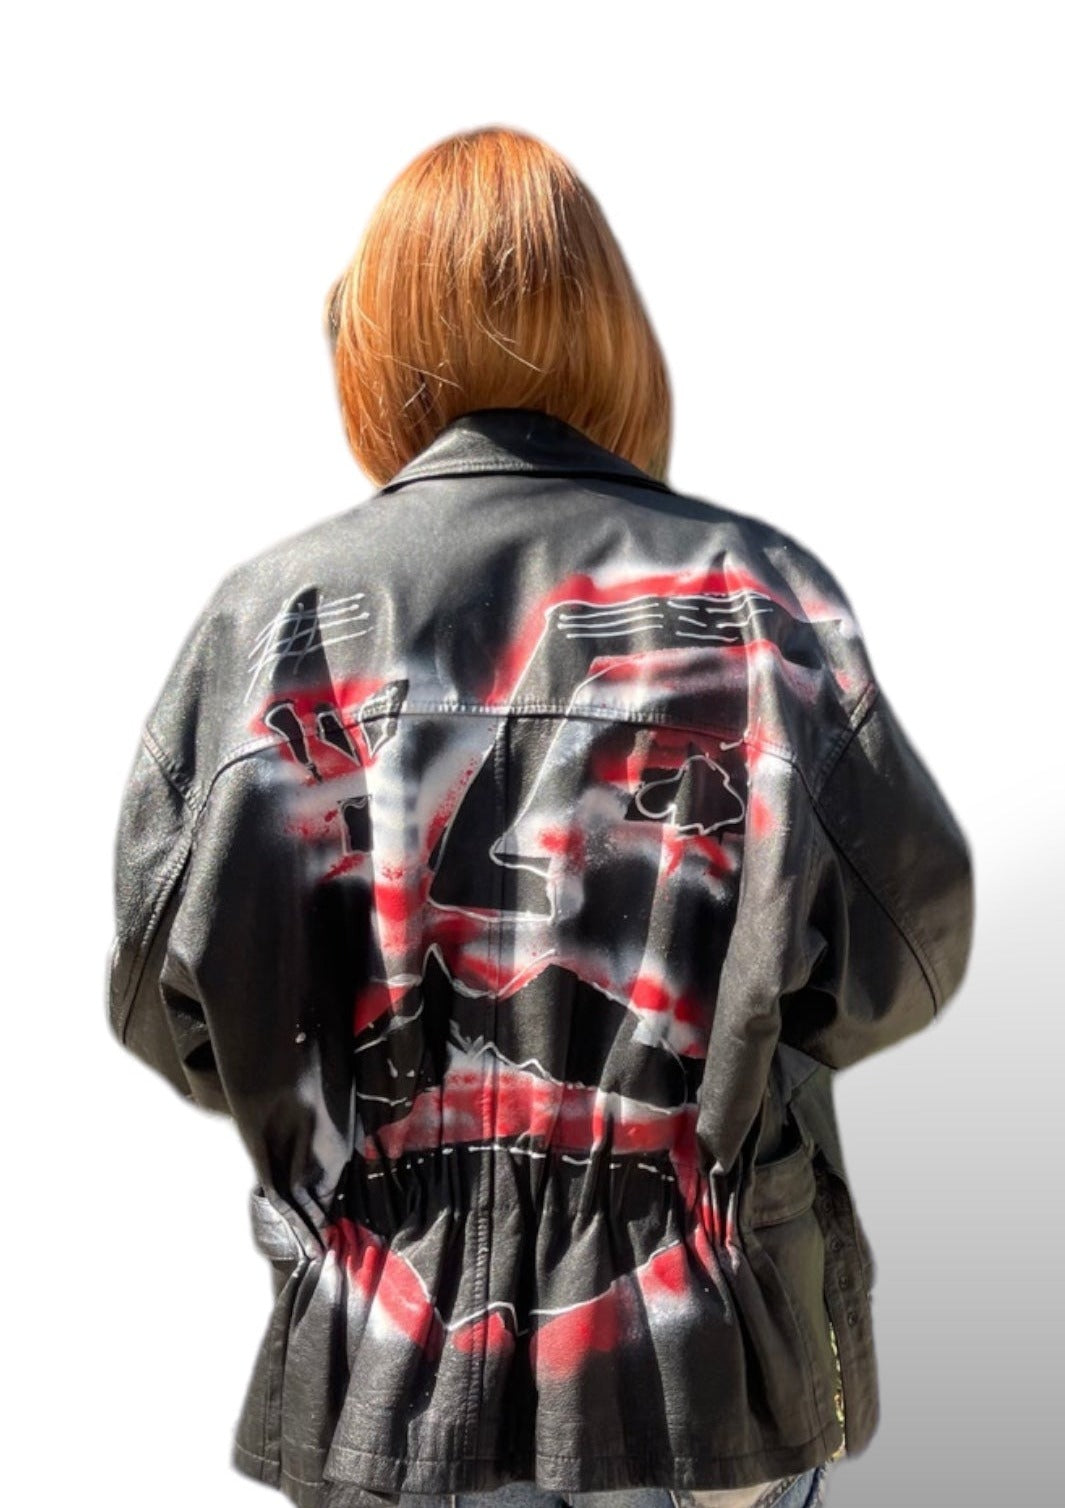 DON'T LOOK BACK JACKET